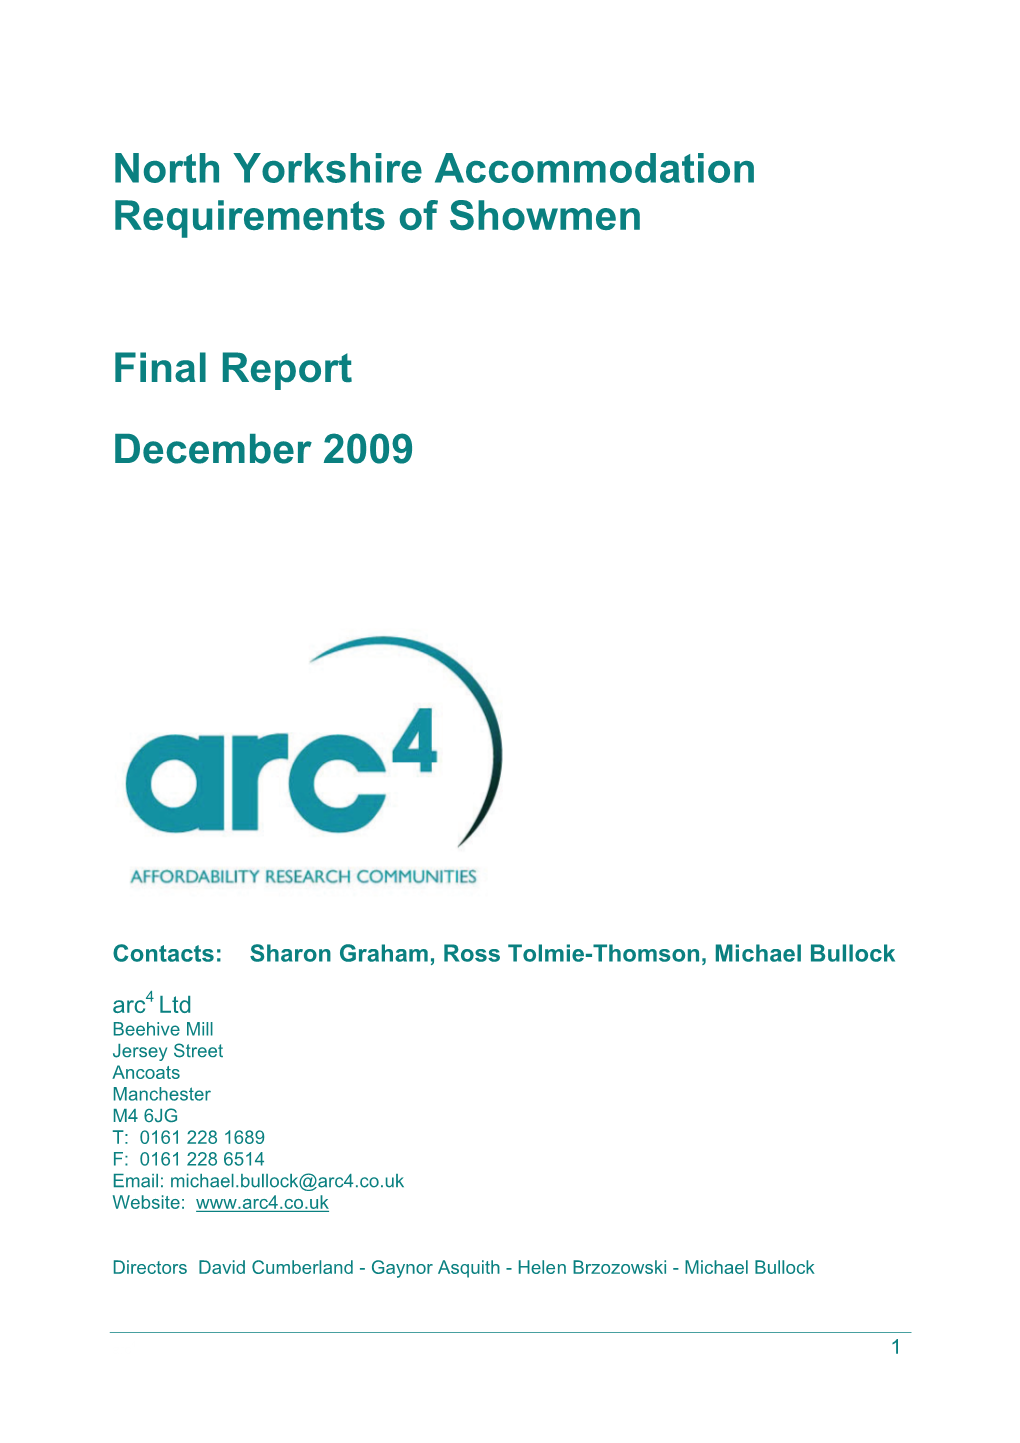 North Yorkshire Accommodation Requirements of Showmen